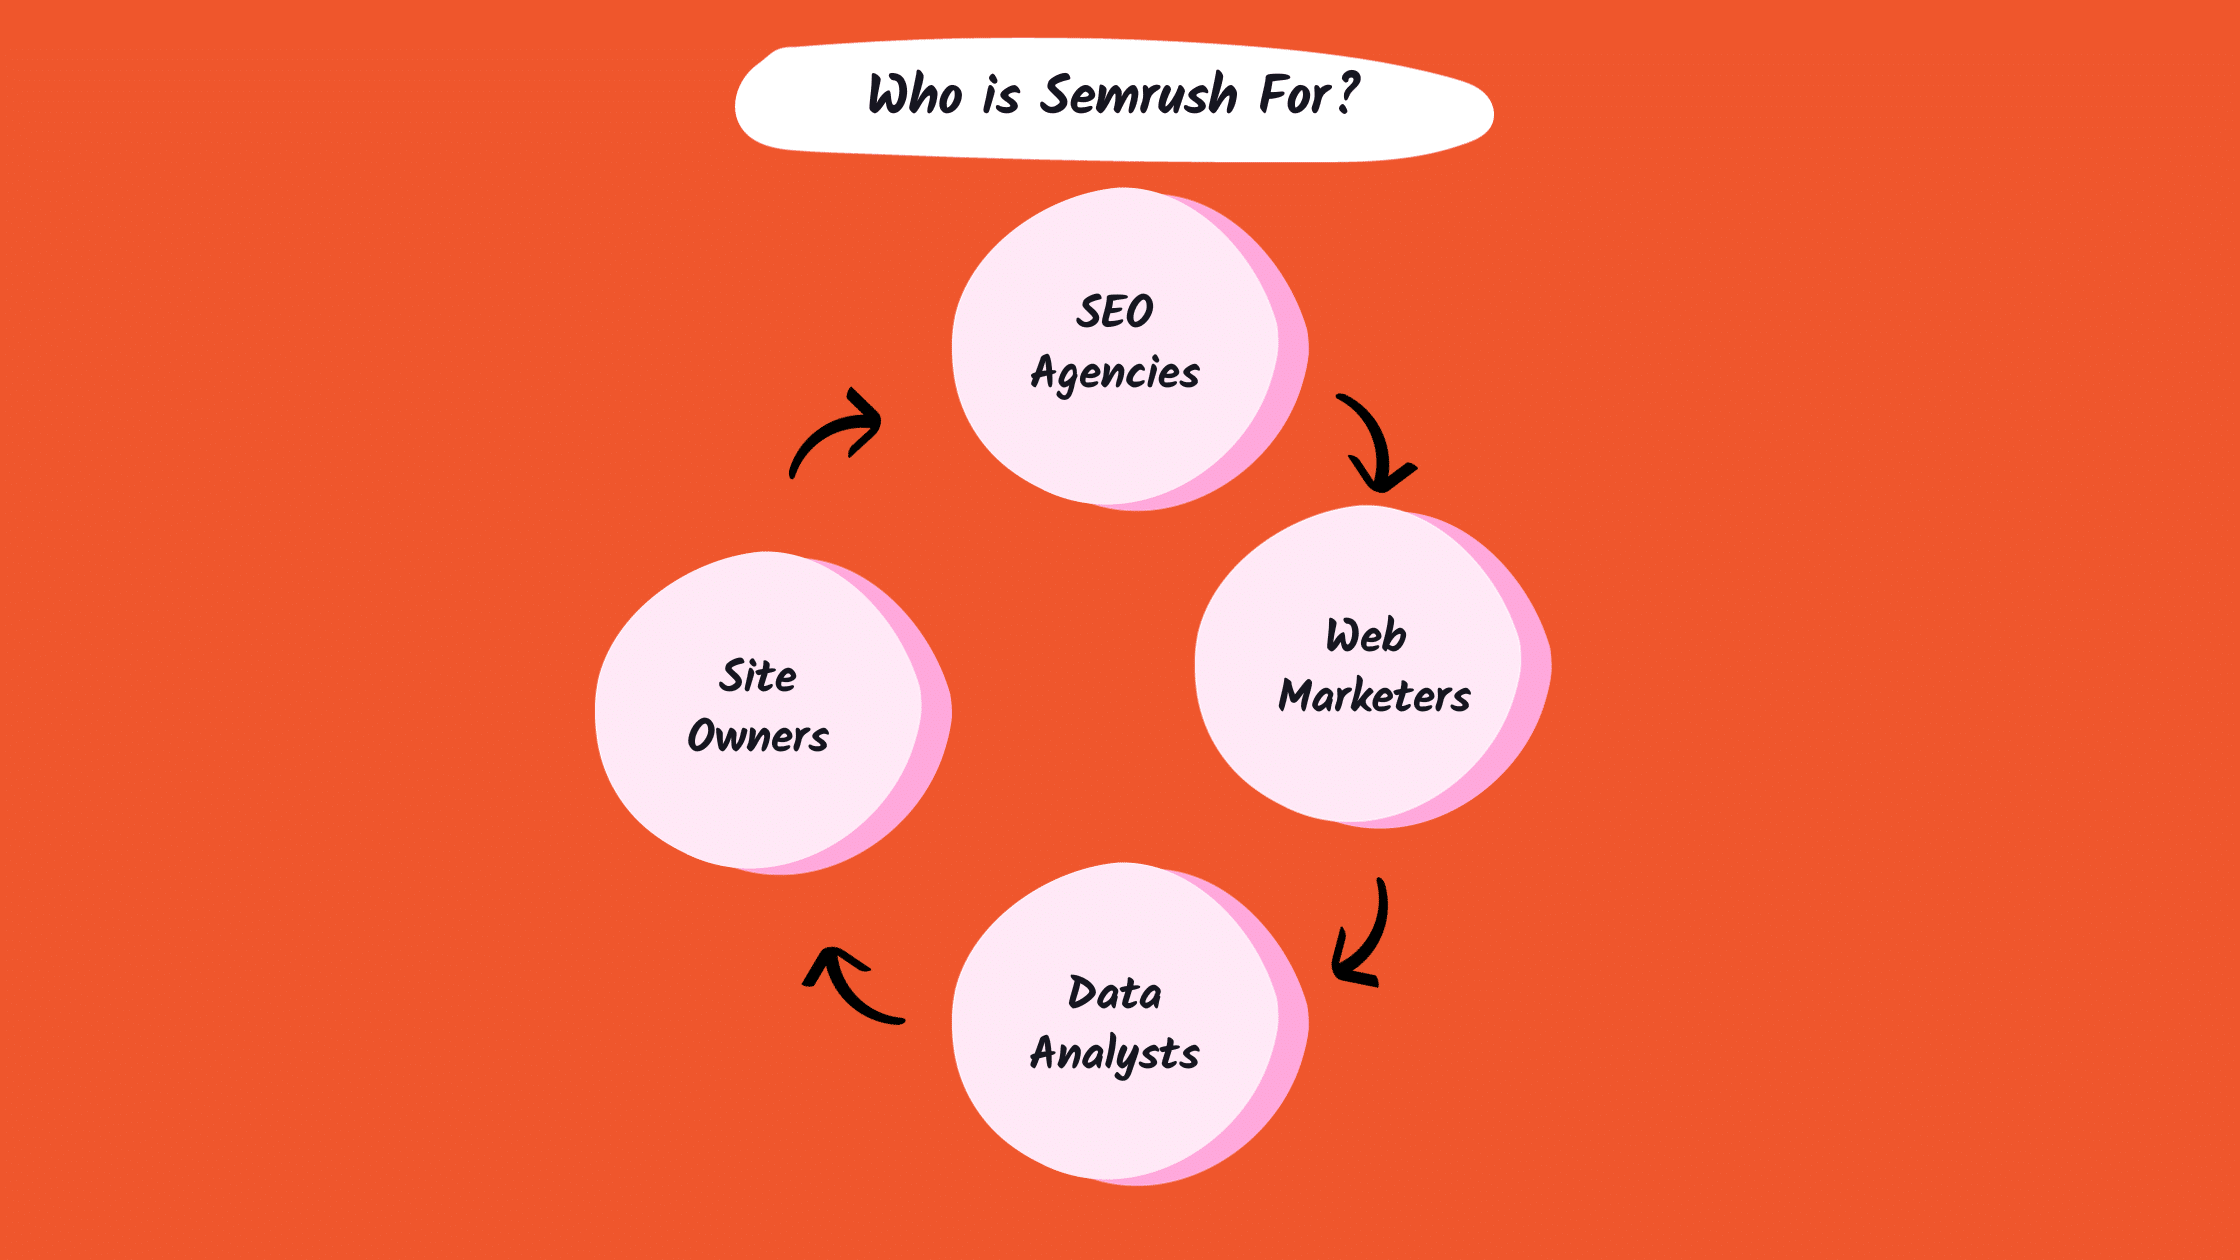 Who is Semrush For?